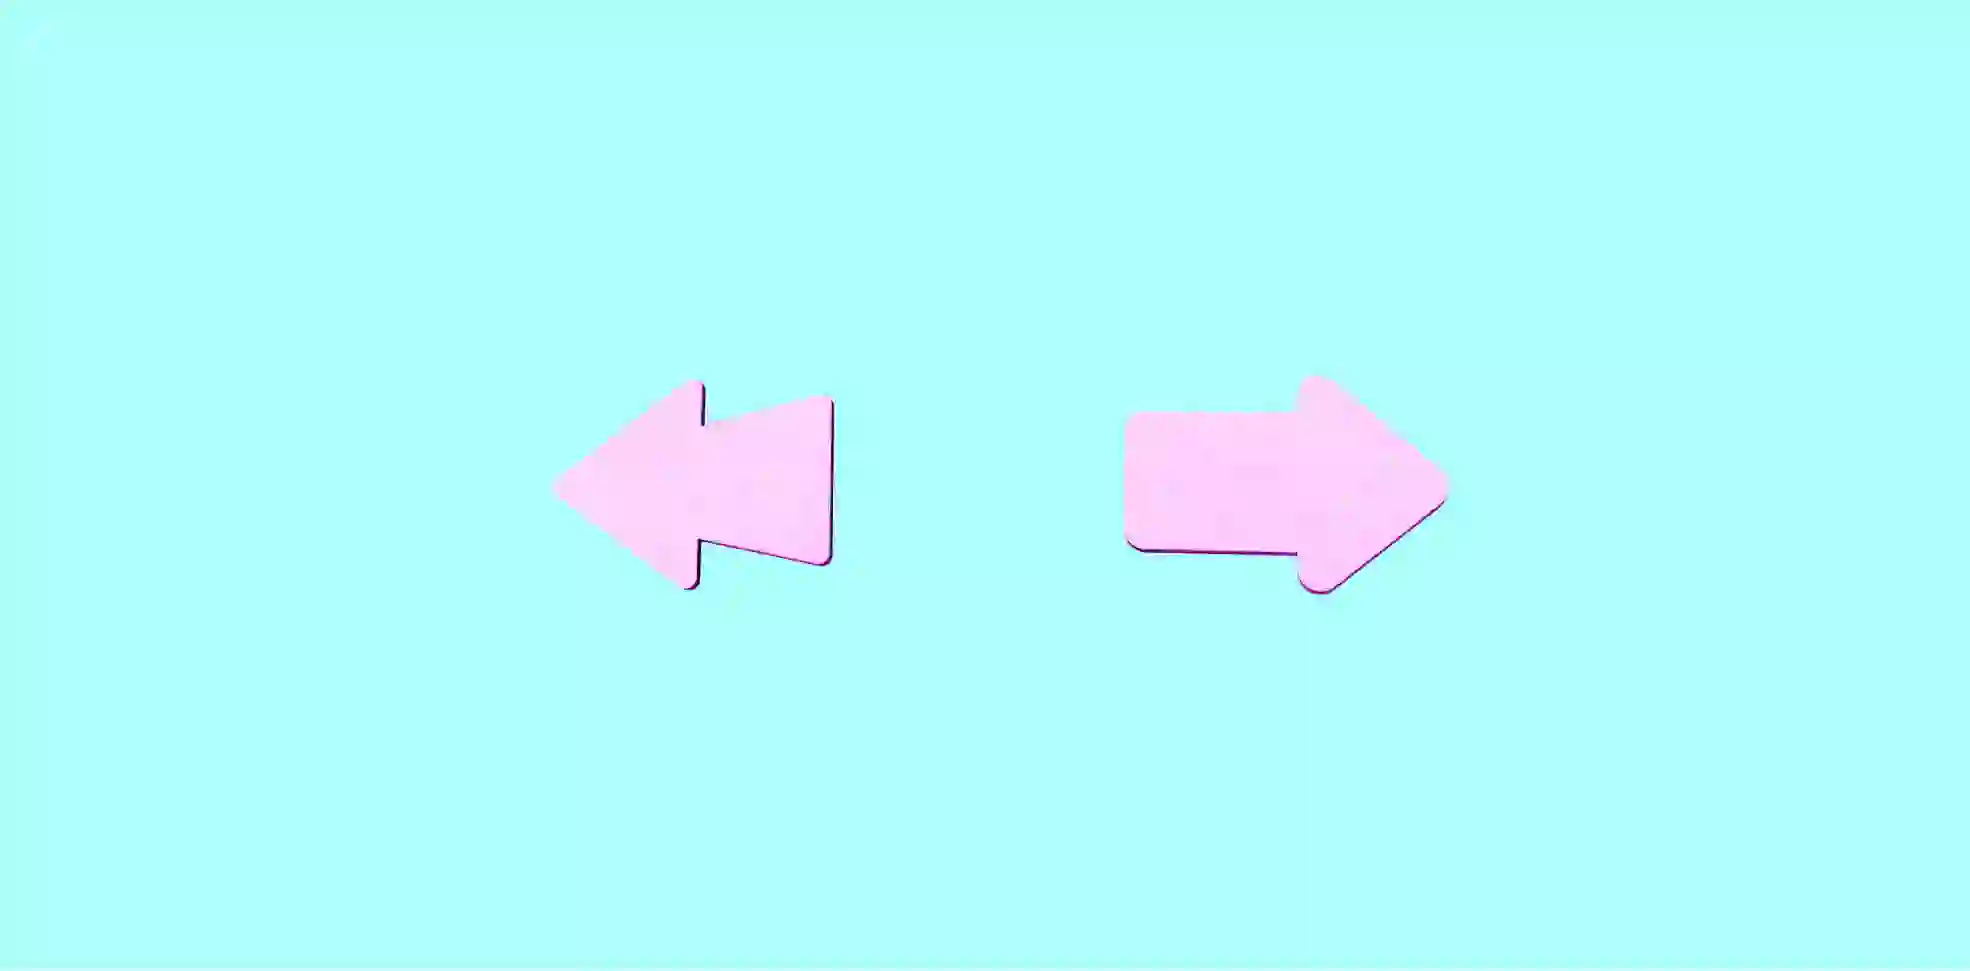 two pink arrows pointing in different directions on aqua background